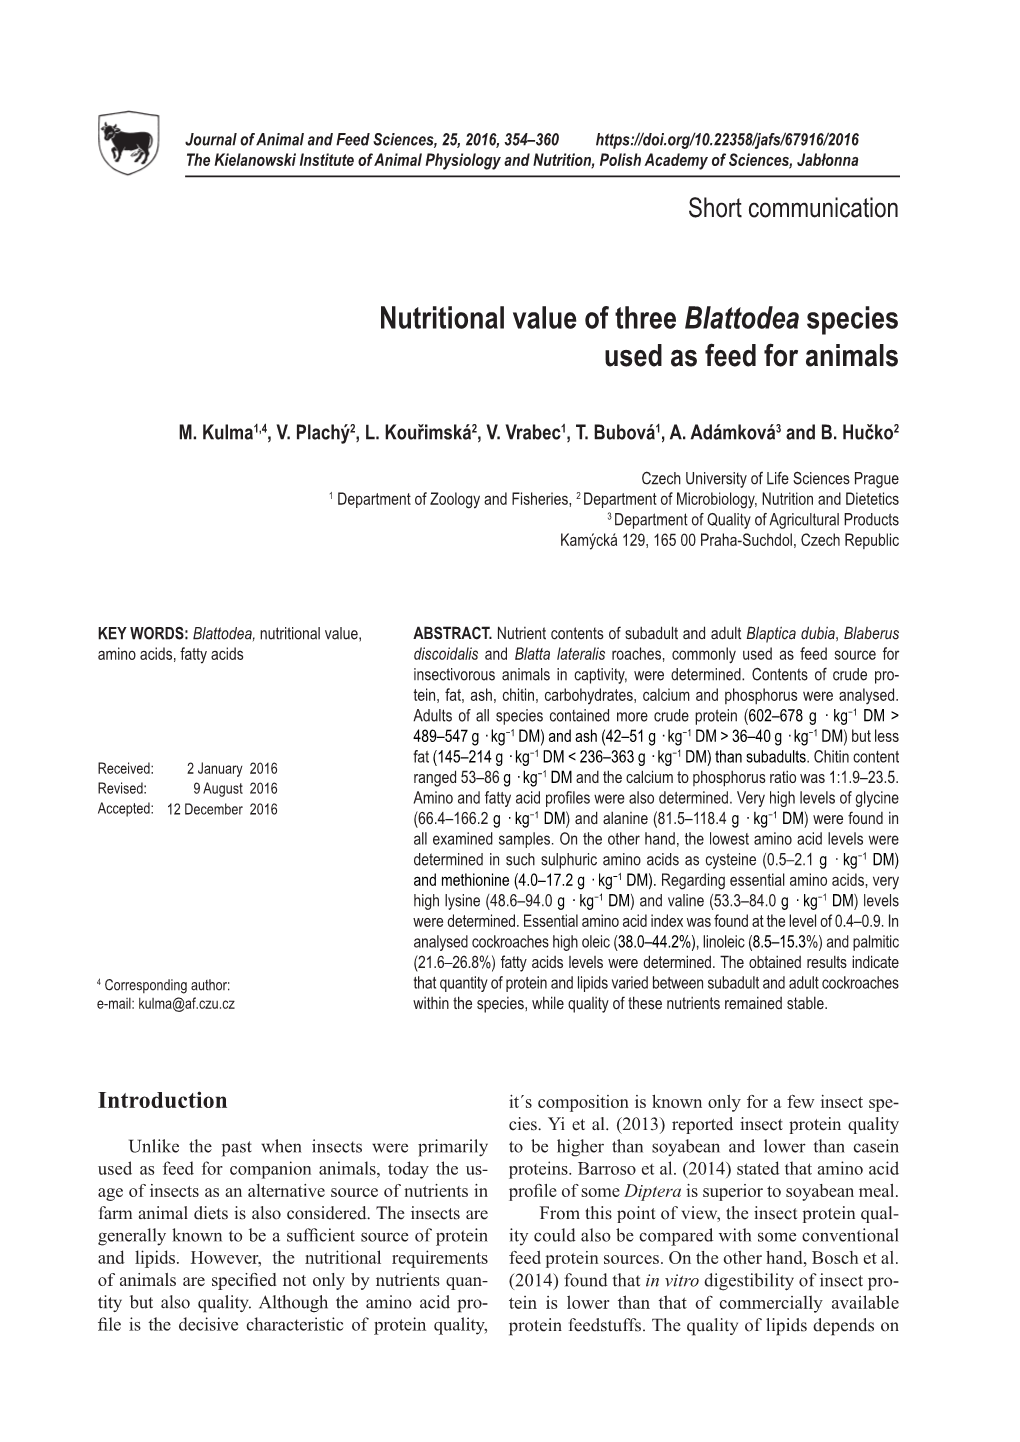 Nutritional Value of Three Blattodea Species Used As Feed for Animals